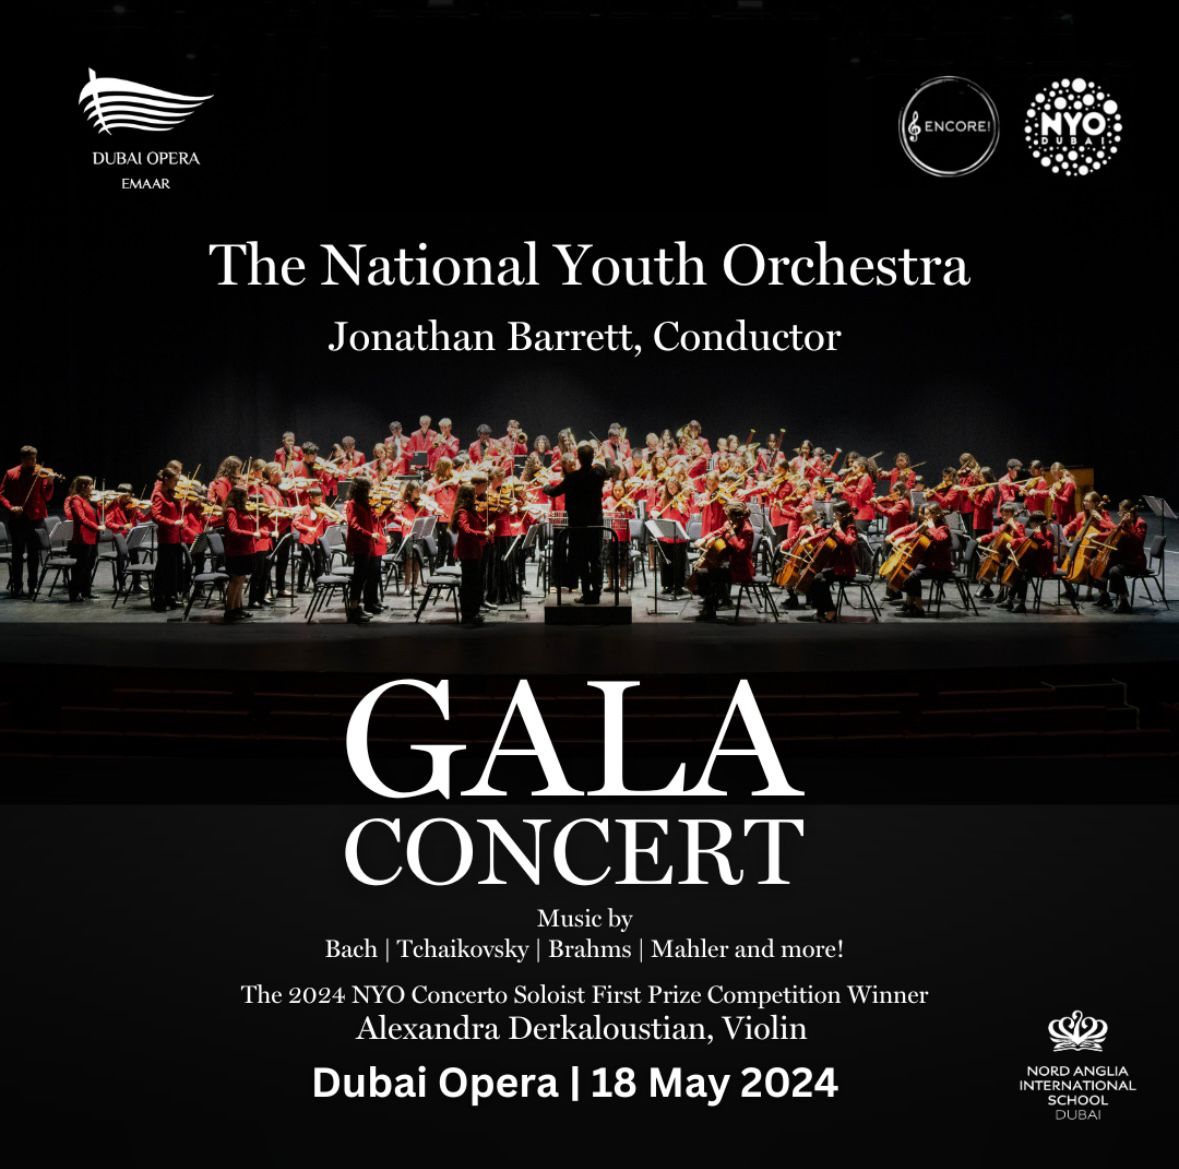 🎶 Join the National Youth Orchestra for an unforgettable evening of symphonic splendour at Dubai Opera! ✨ The National Youth Orchestra cordially invites you to its annual Gala Concert on May 18th, 2024.